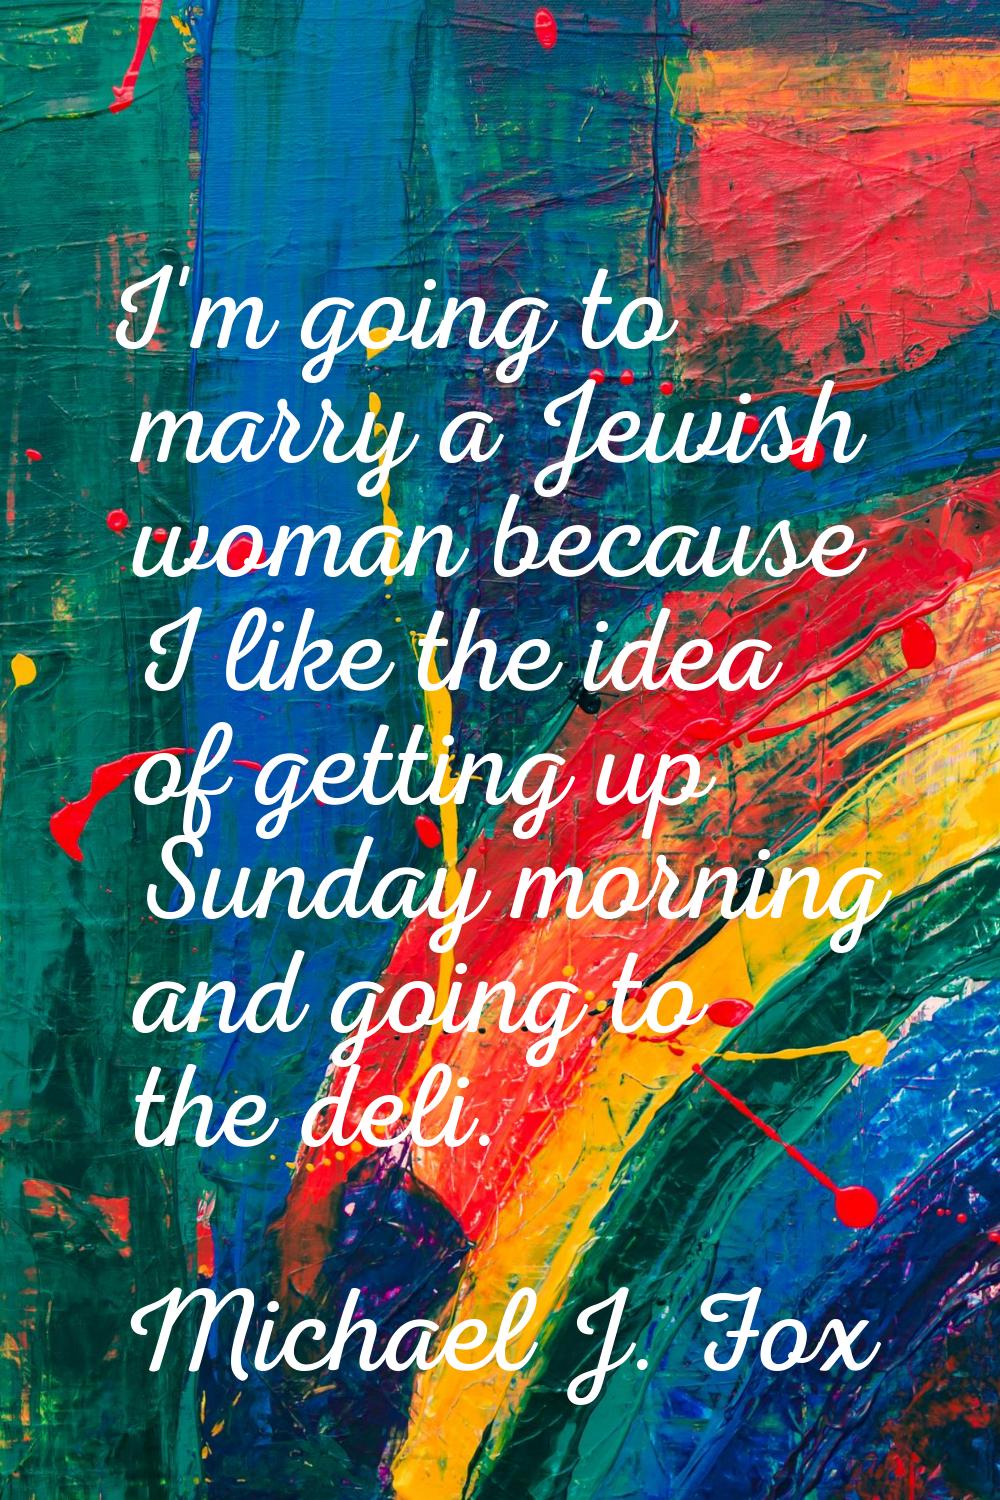 I'm going to marry a Jewish woman because I like the idea of getting up Sunday morning and going to